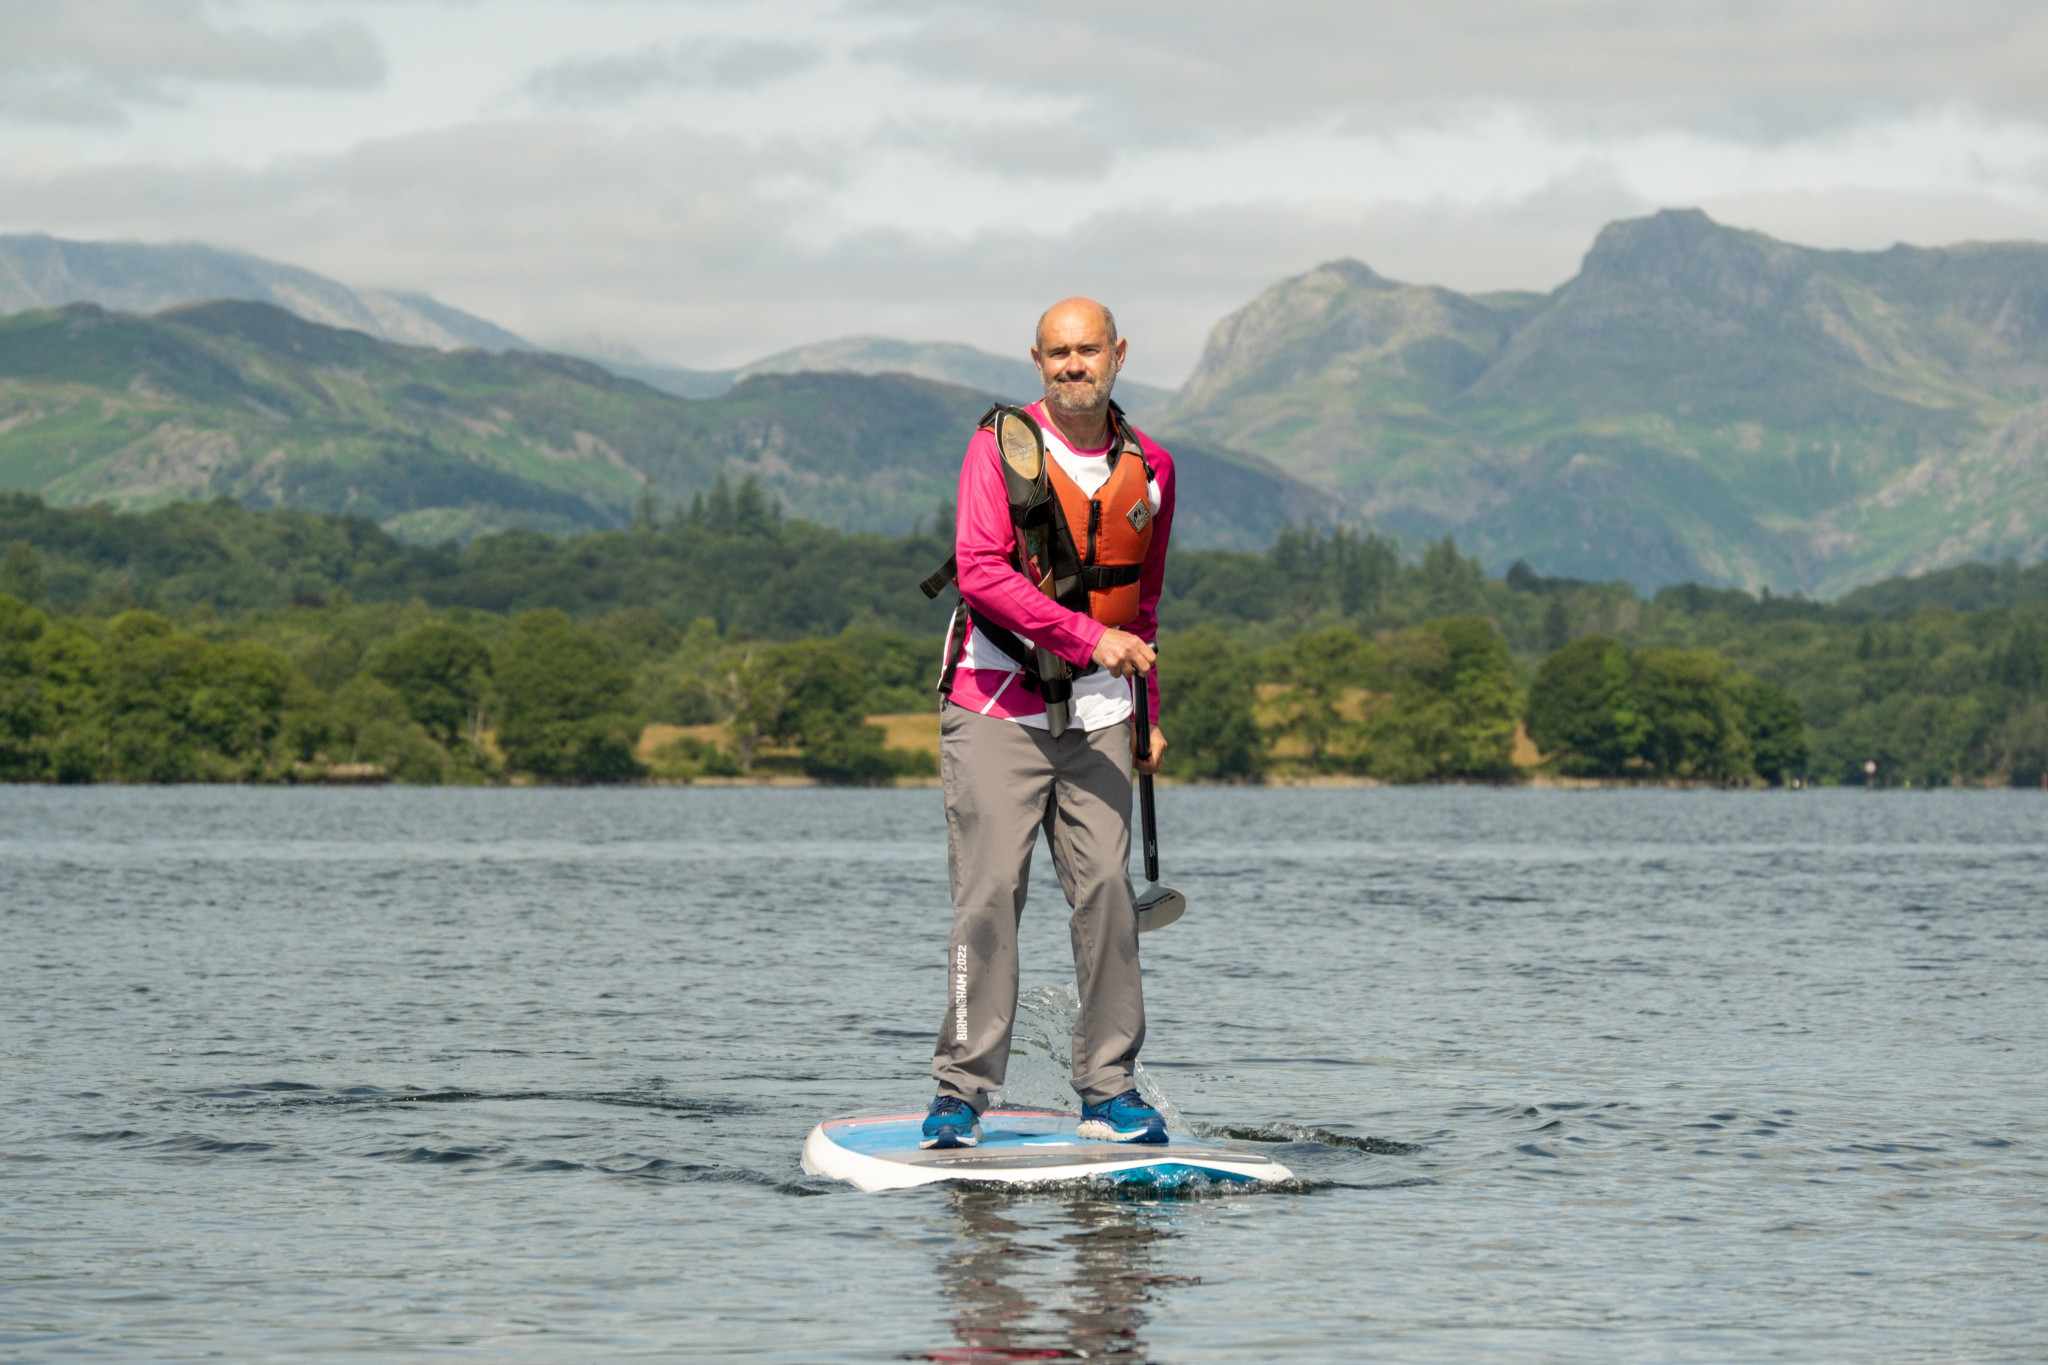 The Baton was brought across Lake Windermere by paddleboard ©Birmingham 2022/Getty Images